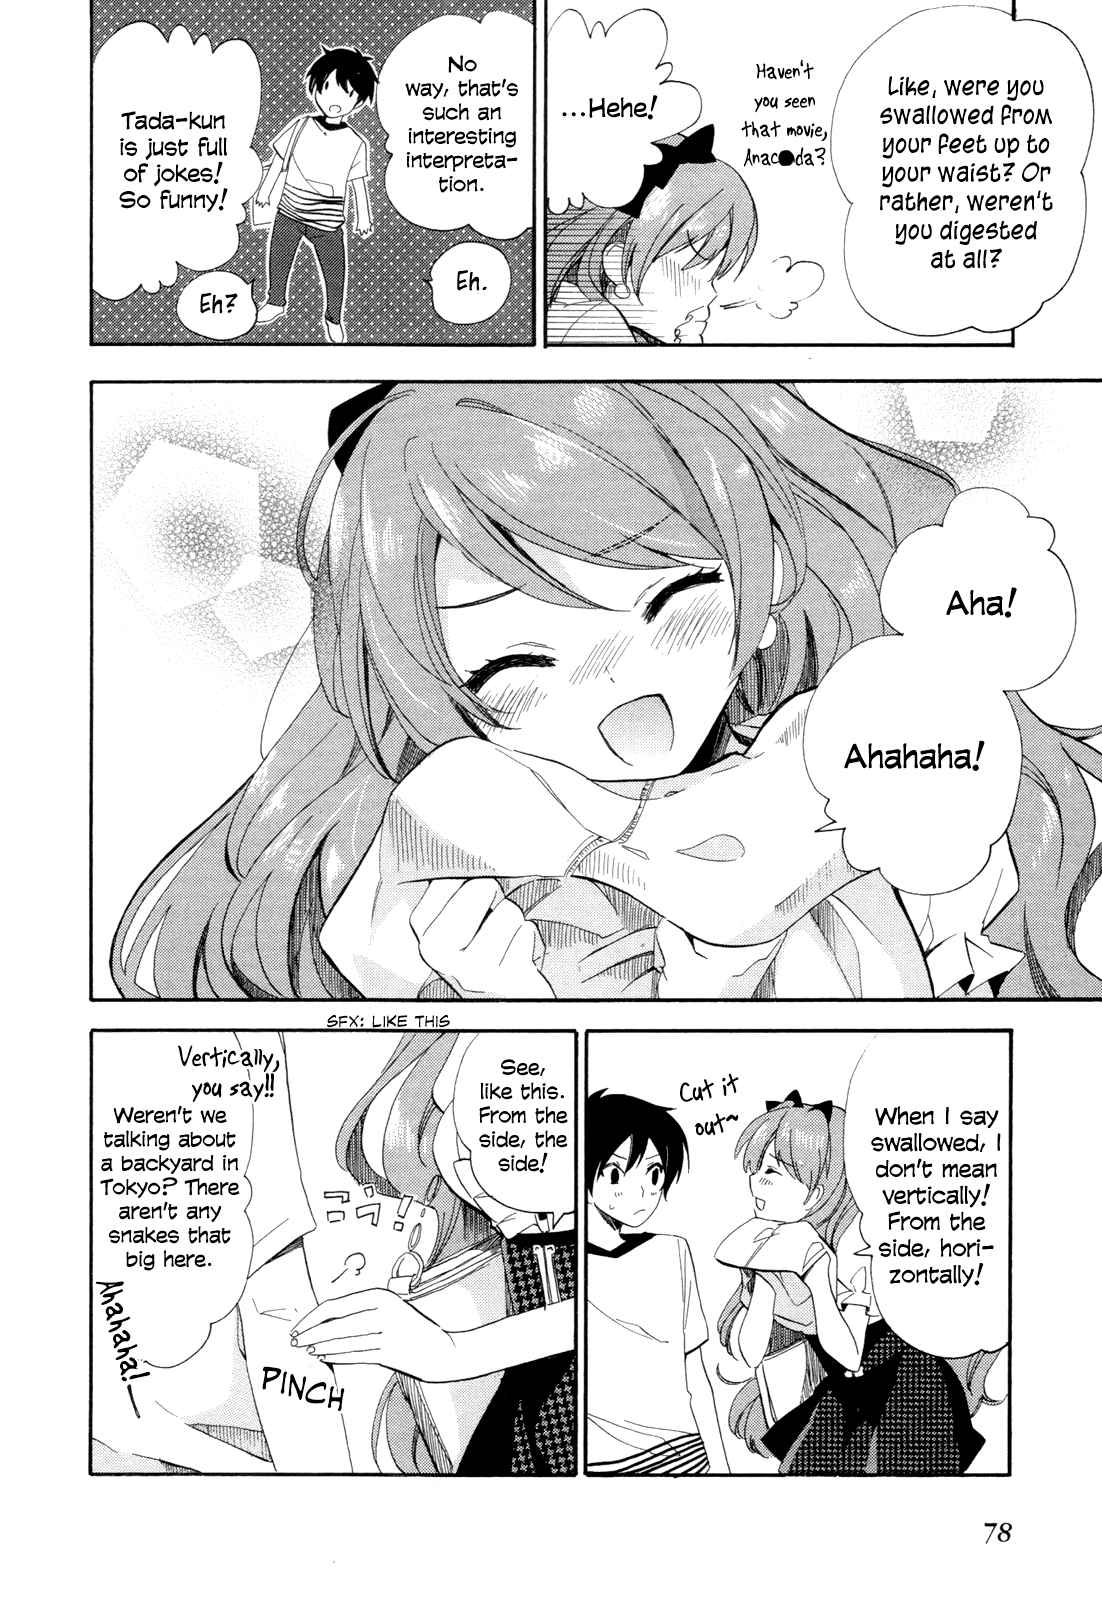 Golden Time Vol. 3 Ch. 15 Things You Really Don't Like